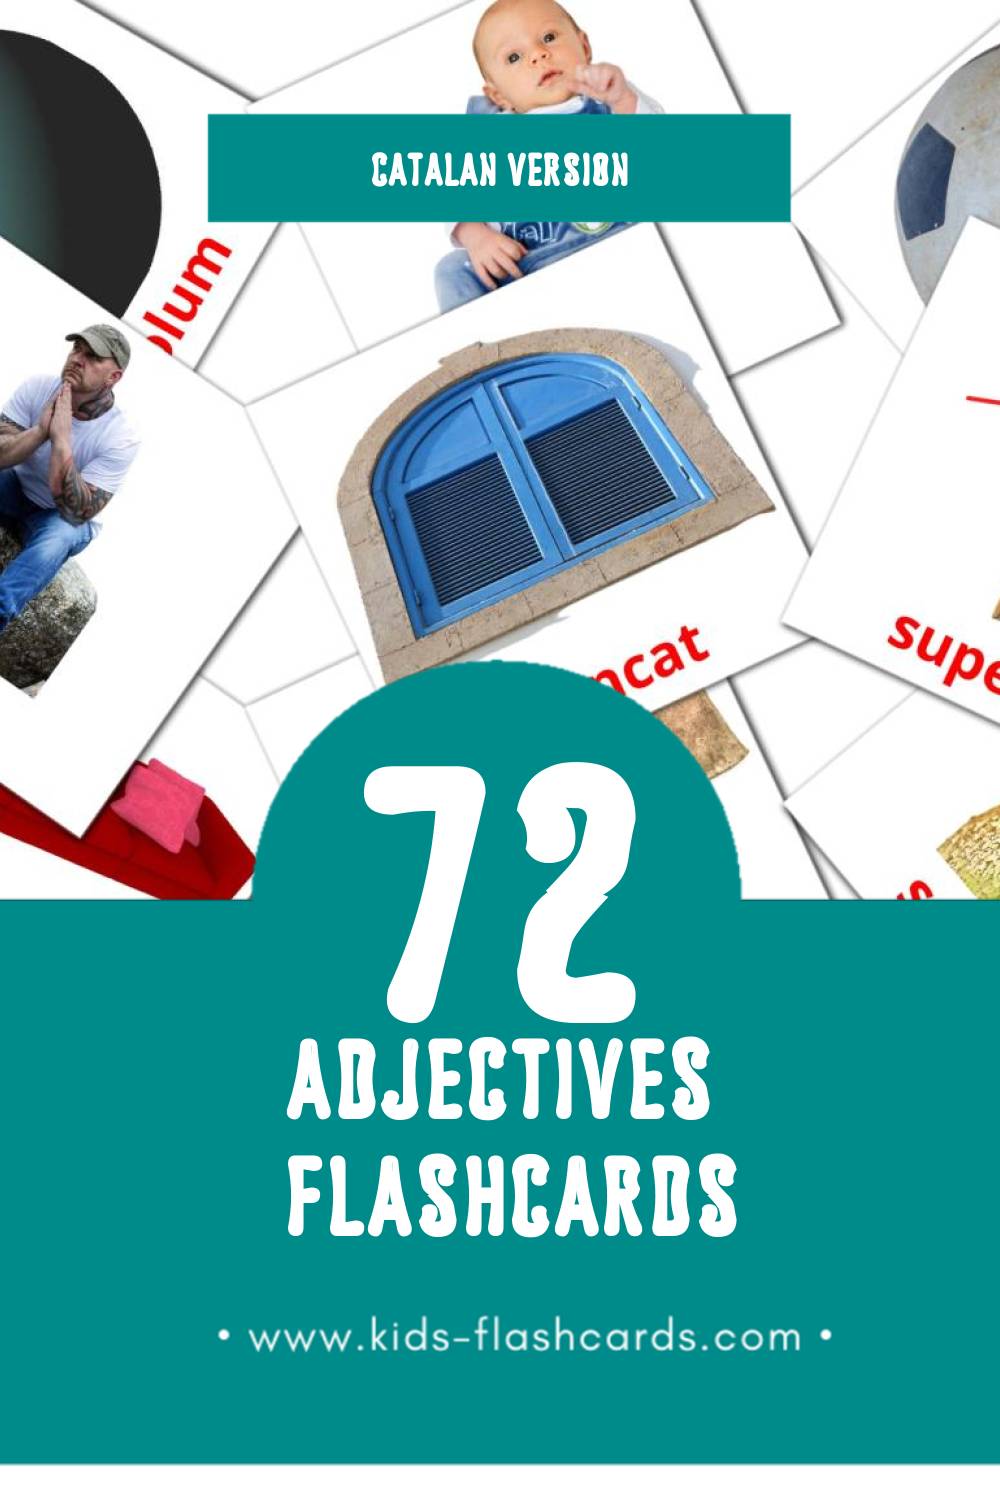 Visual Adjectius Flashcards for Toddlers (72 cards in Catalan)